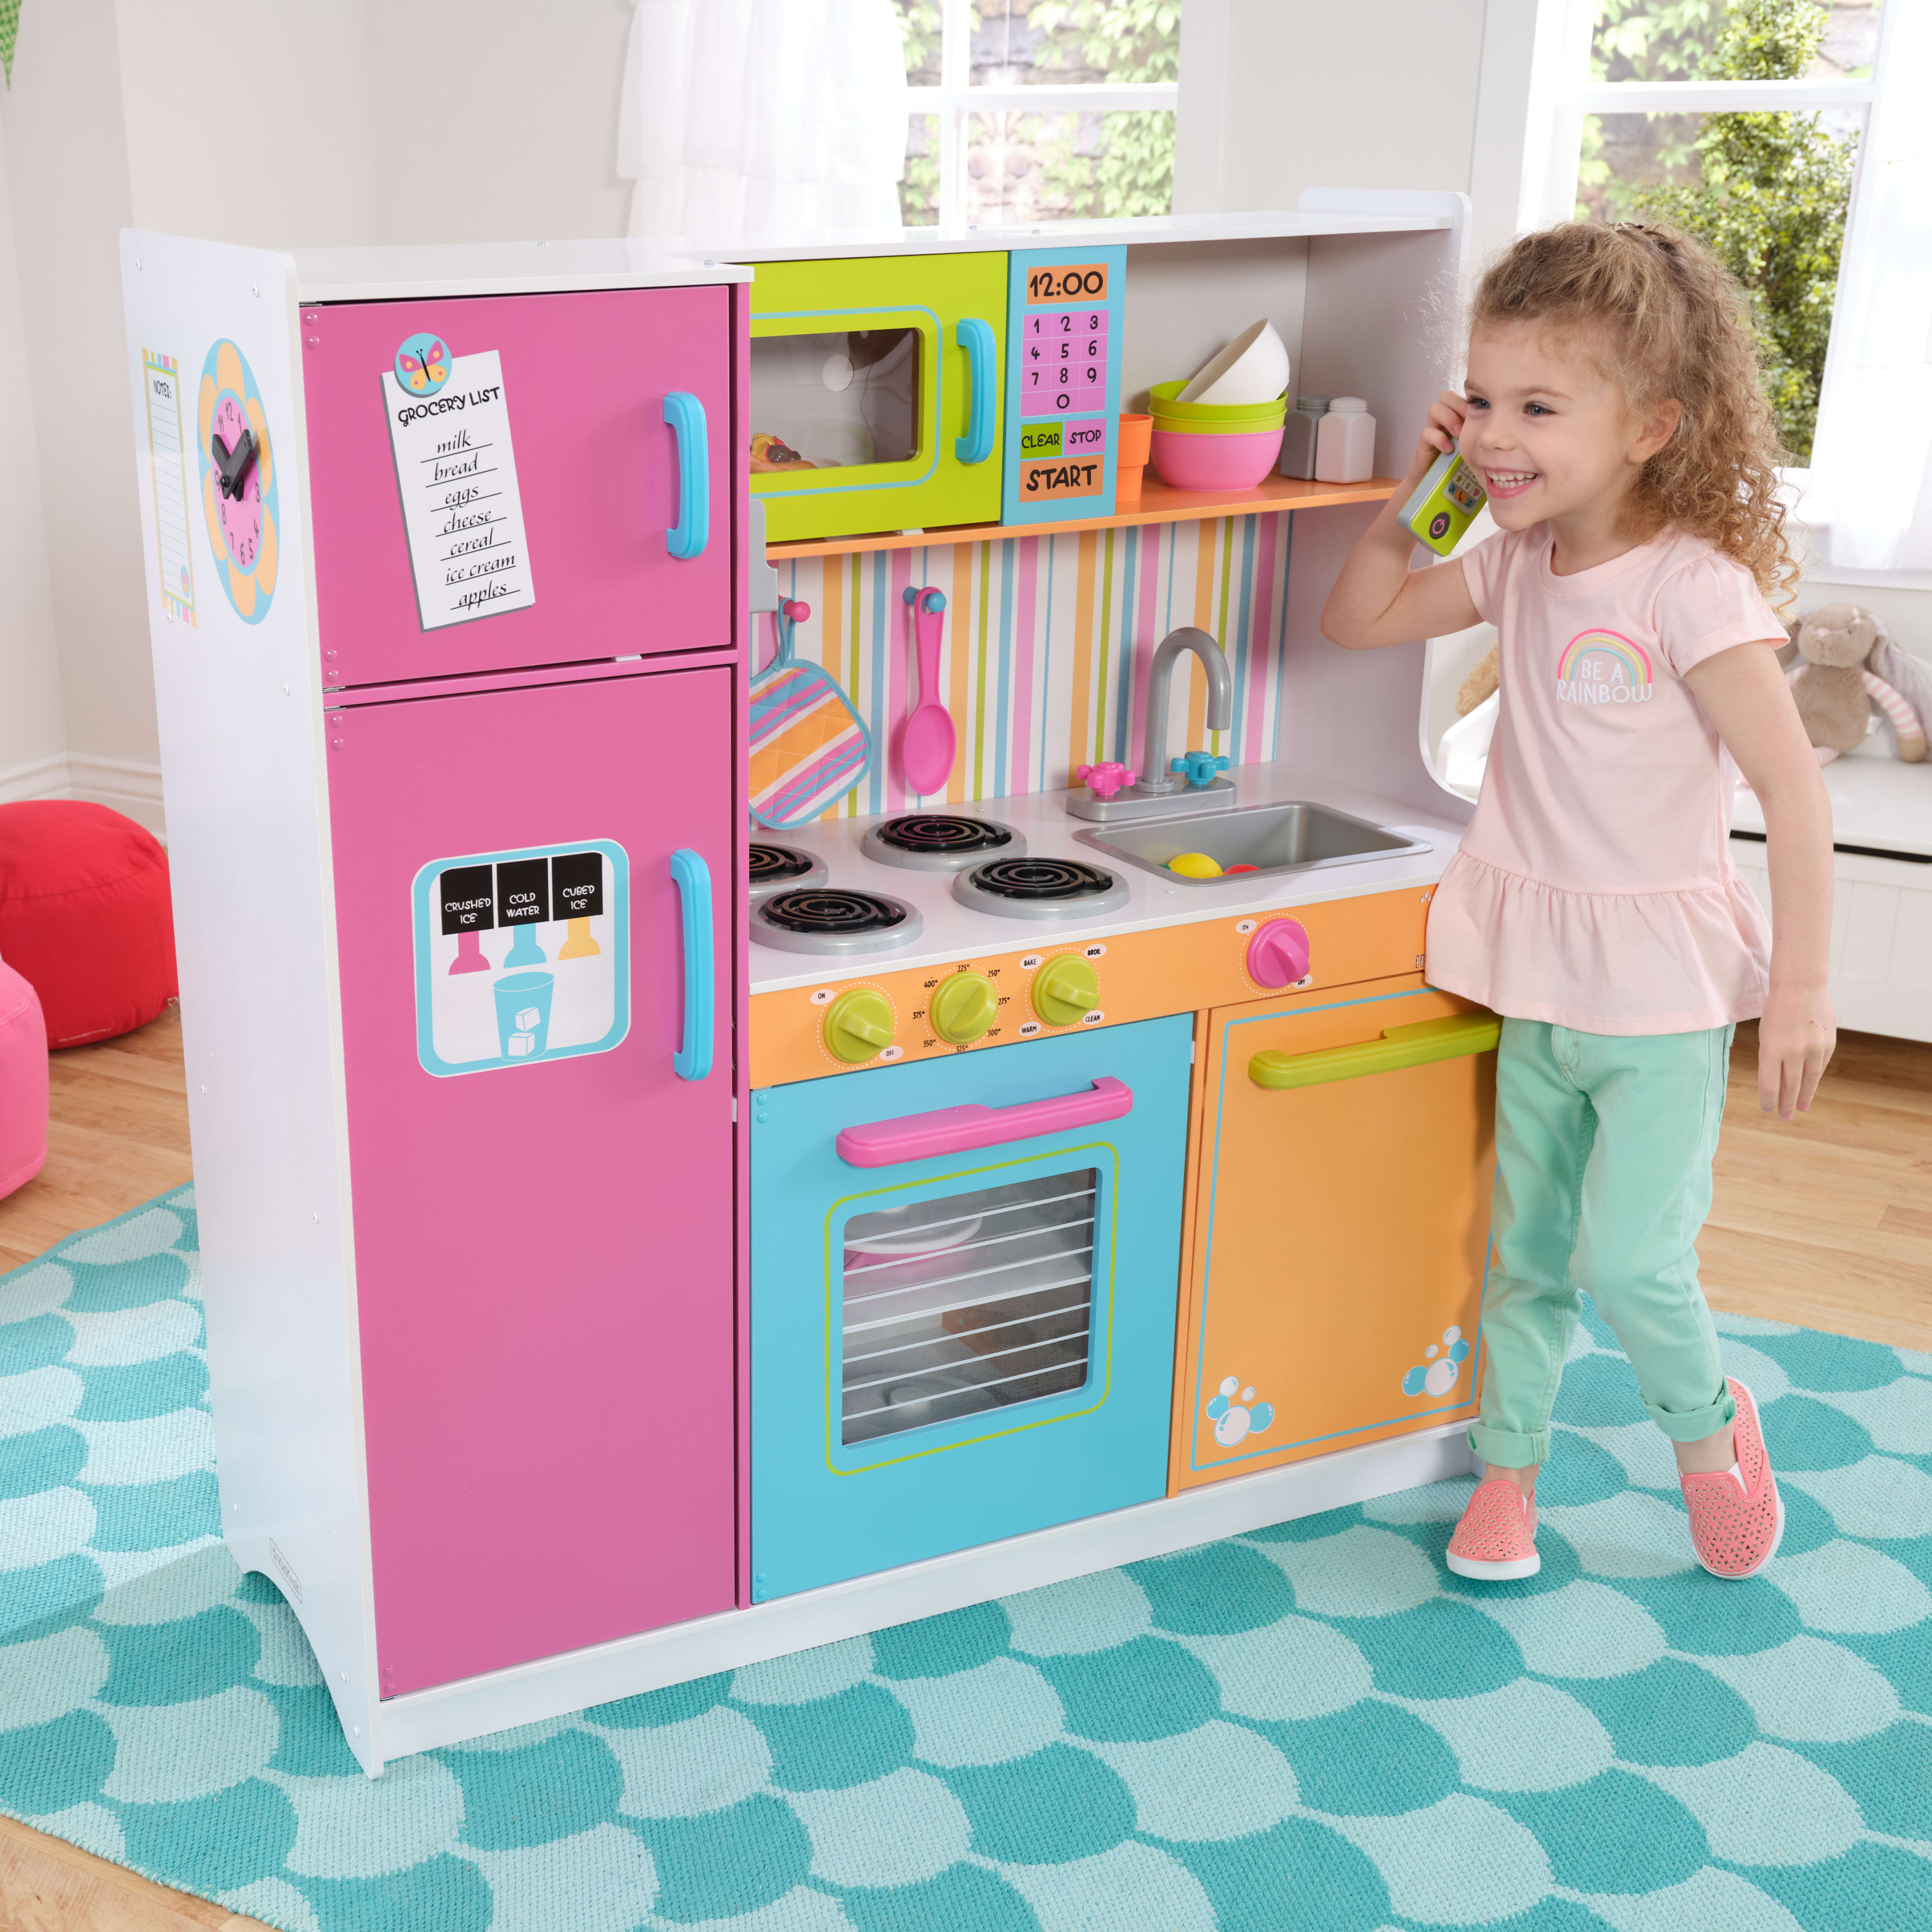 KidKraft Deluxe Big and Bright Wooden Play Kitchen for Kids, Neon Colors - image 3 of 10